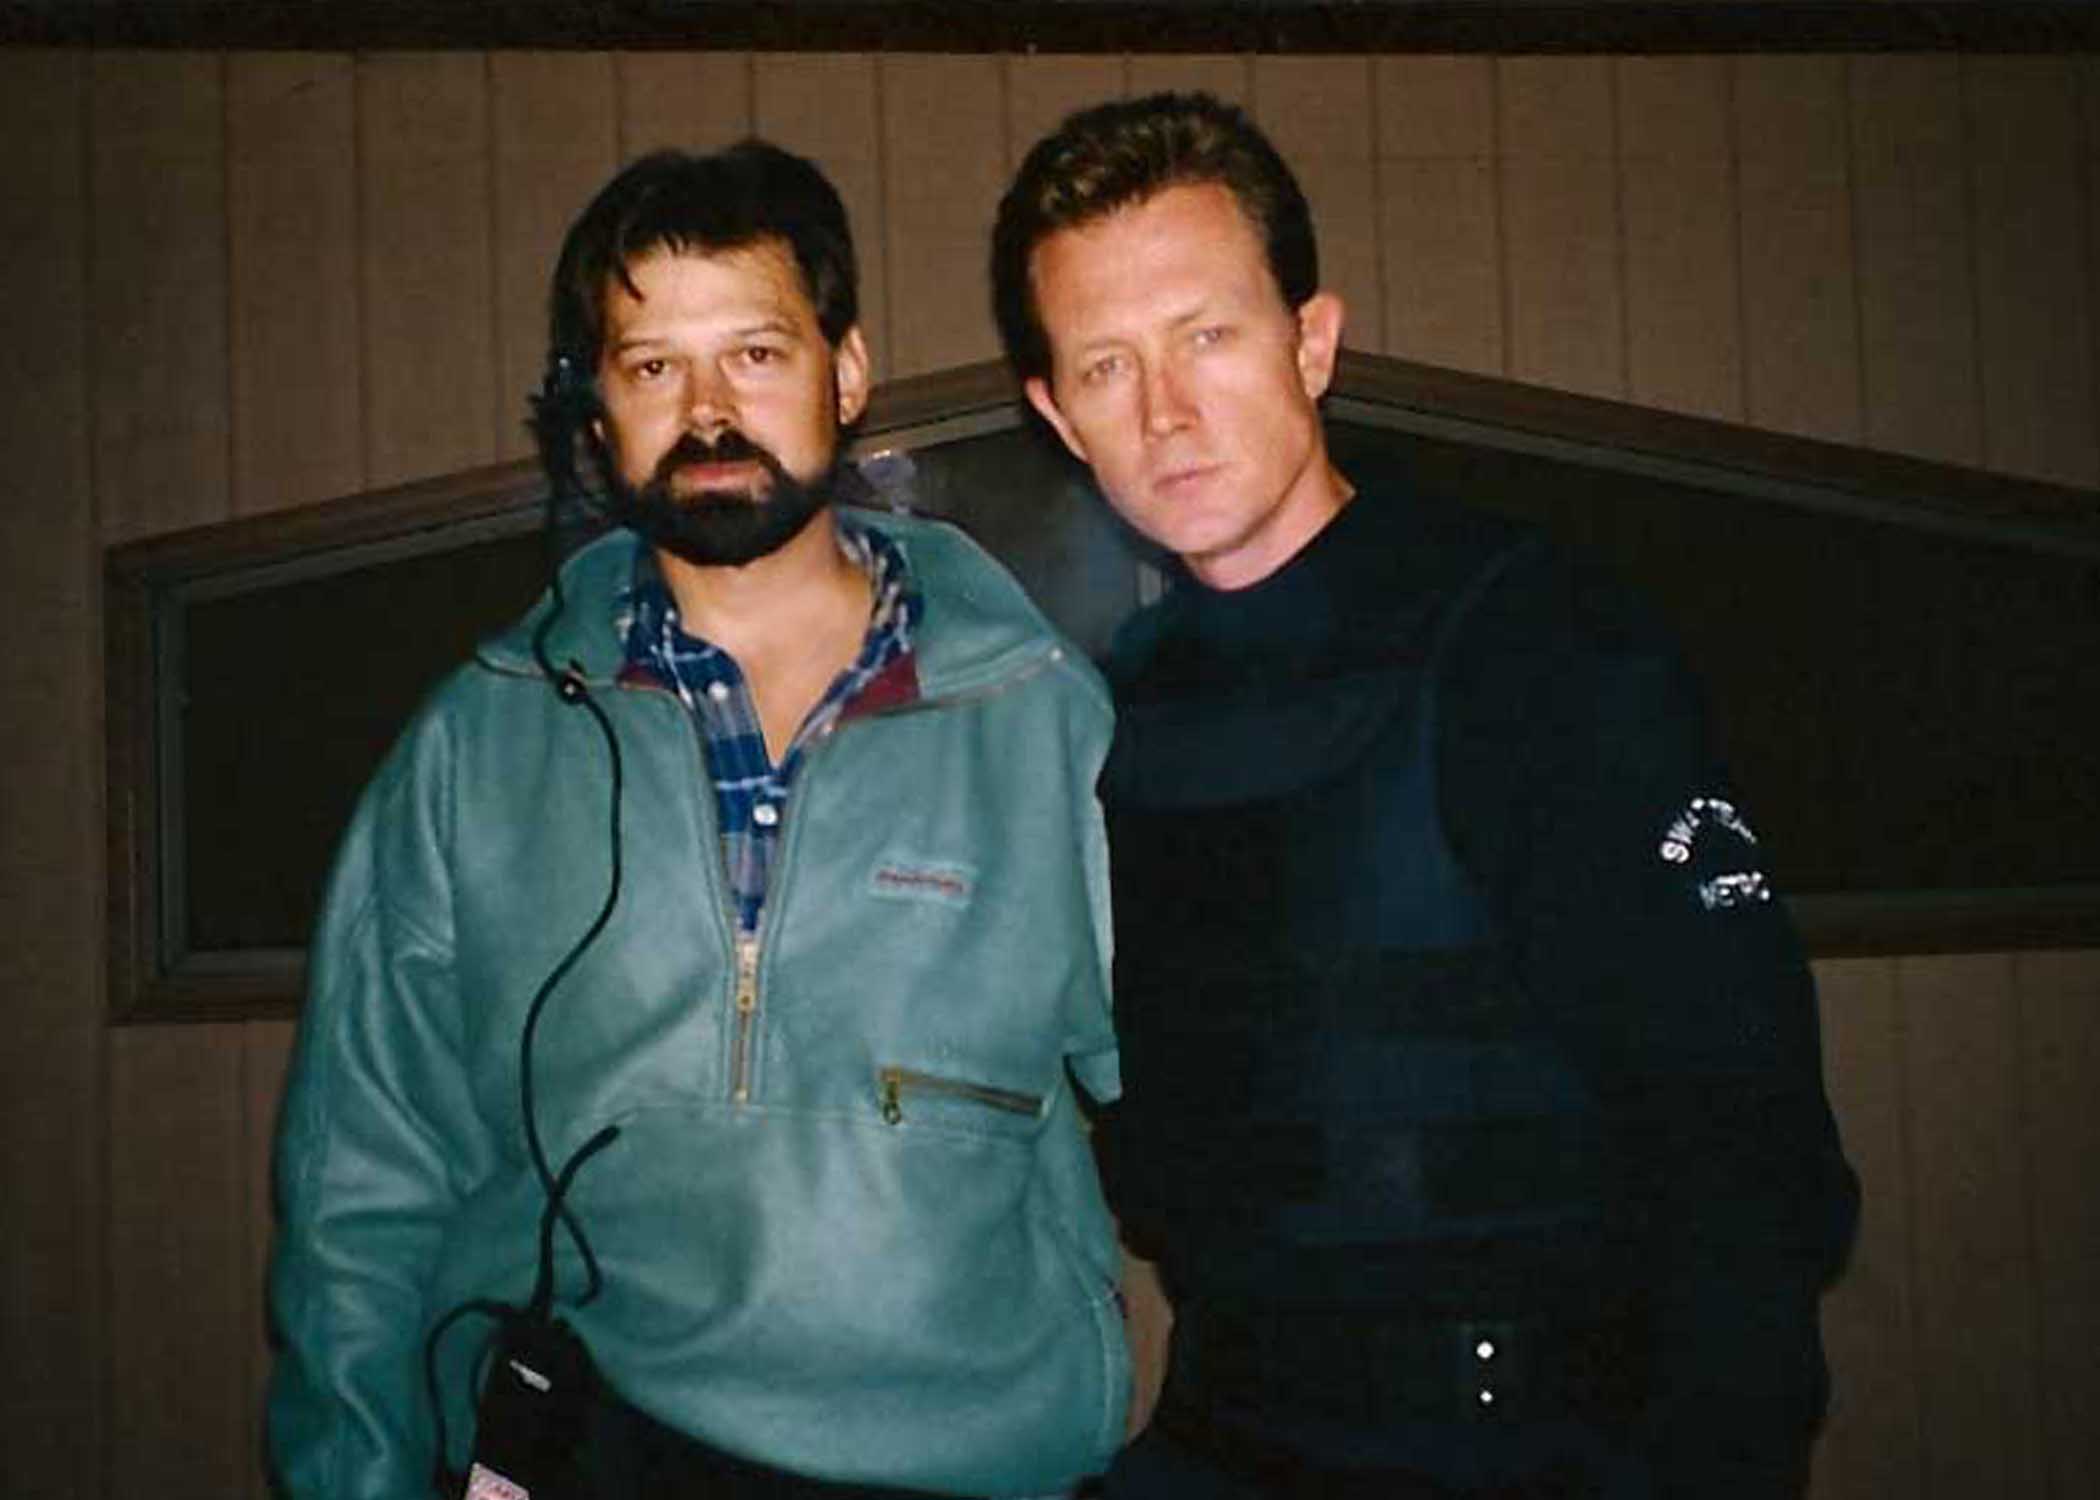 Stephen R. Campanella and Robert Patrick on the set of Counter Force, aka Rogue Force, aka Renegade Force